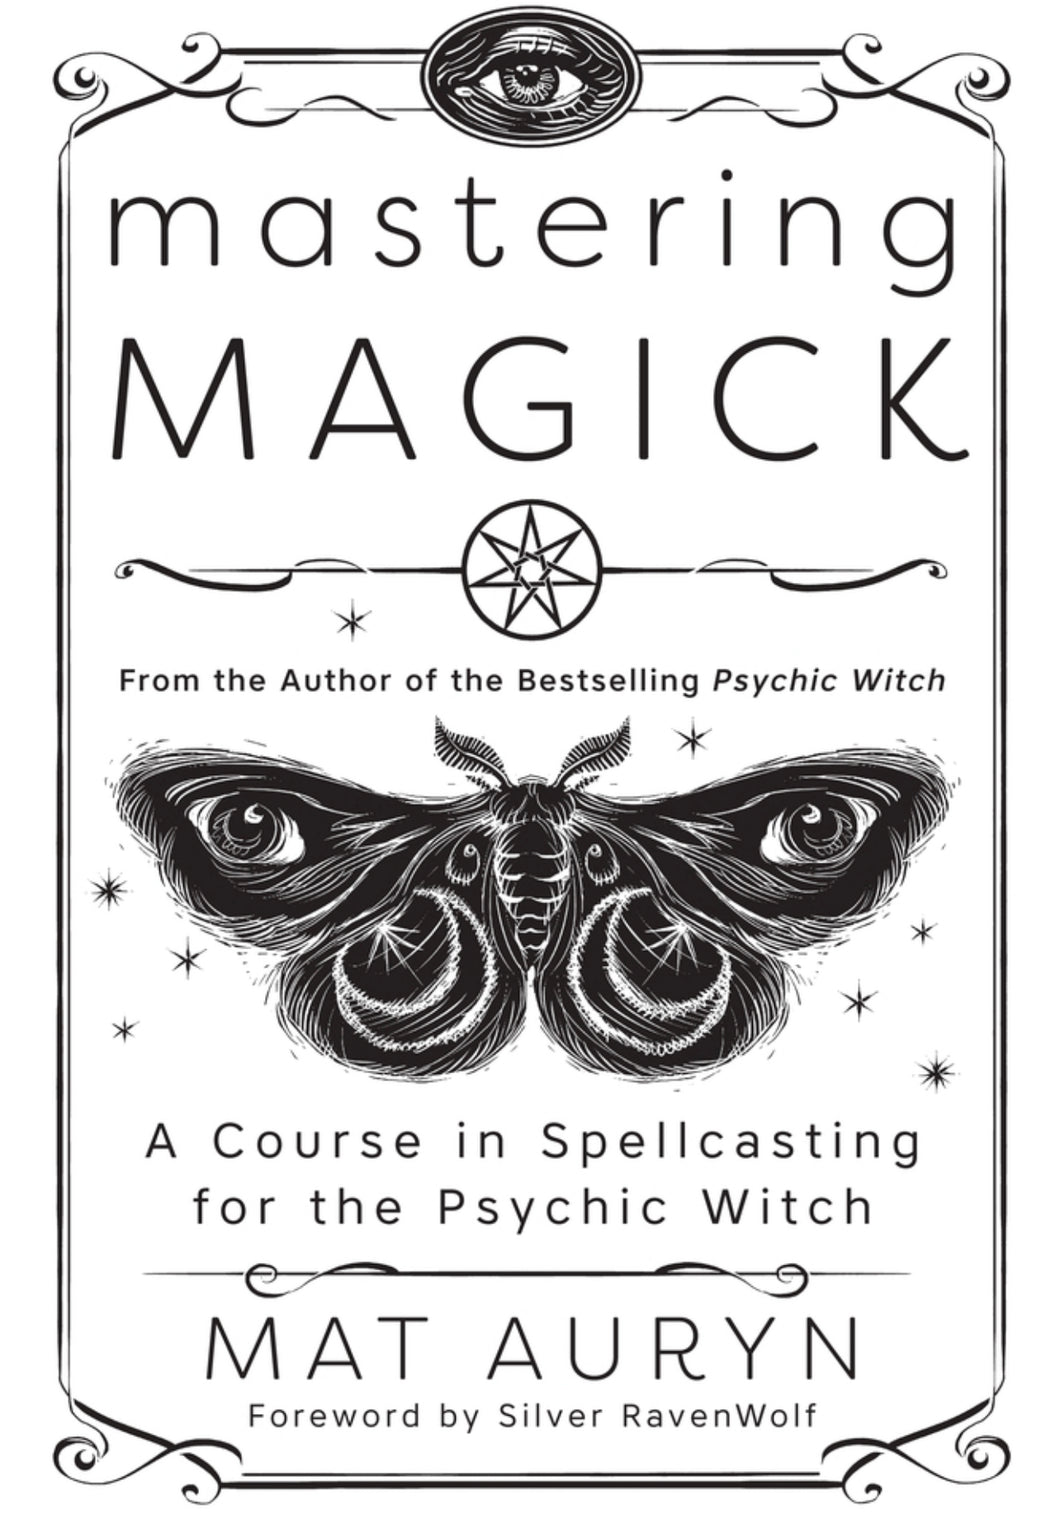 Mastering Magick: A Course in Spellcasting for the Psychic Witch by Mat Auryn